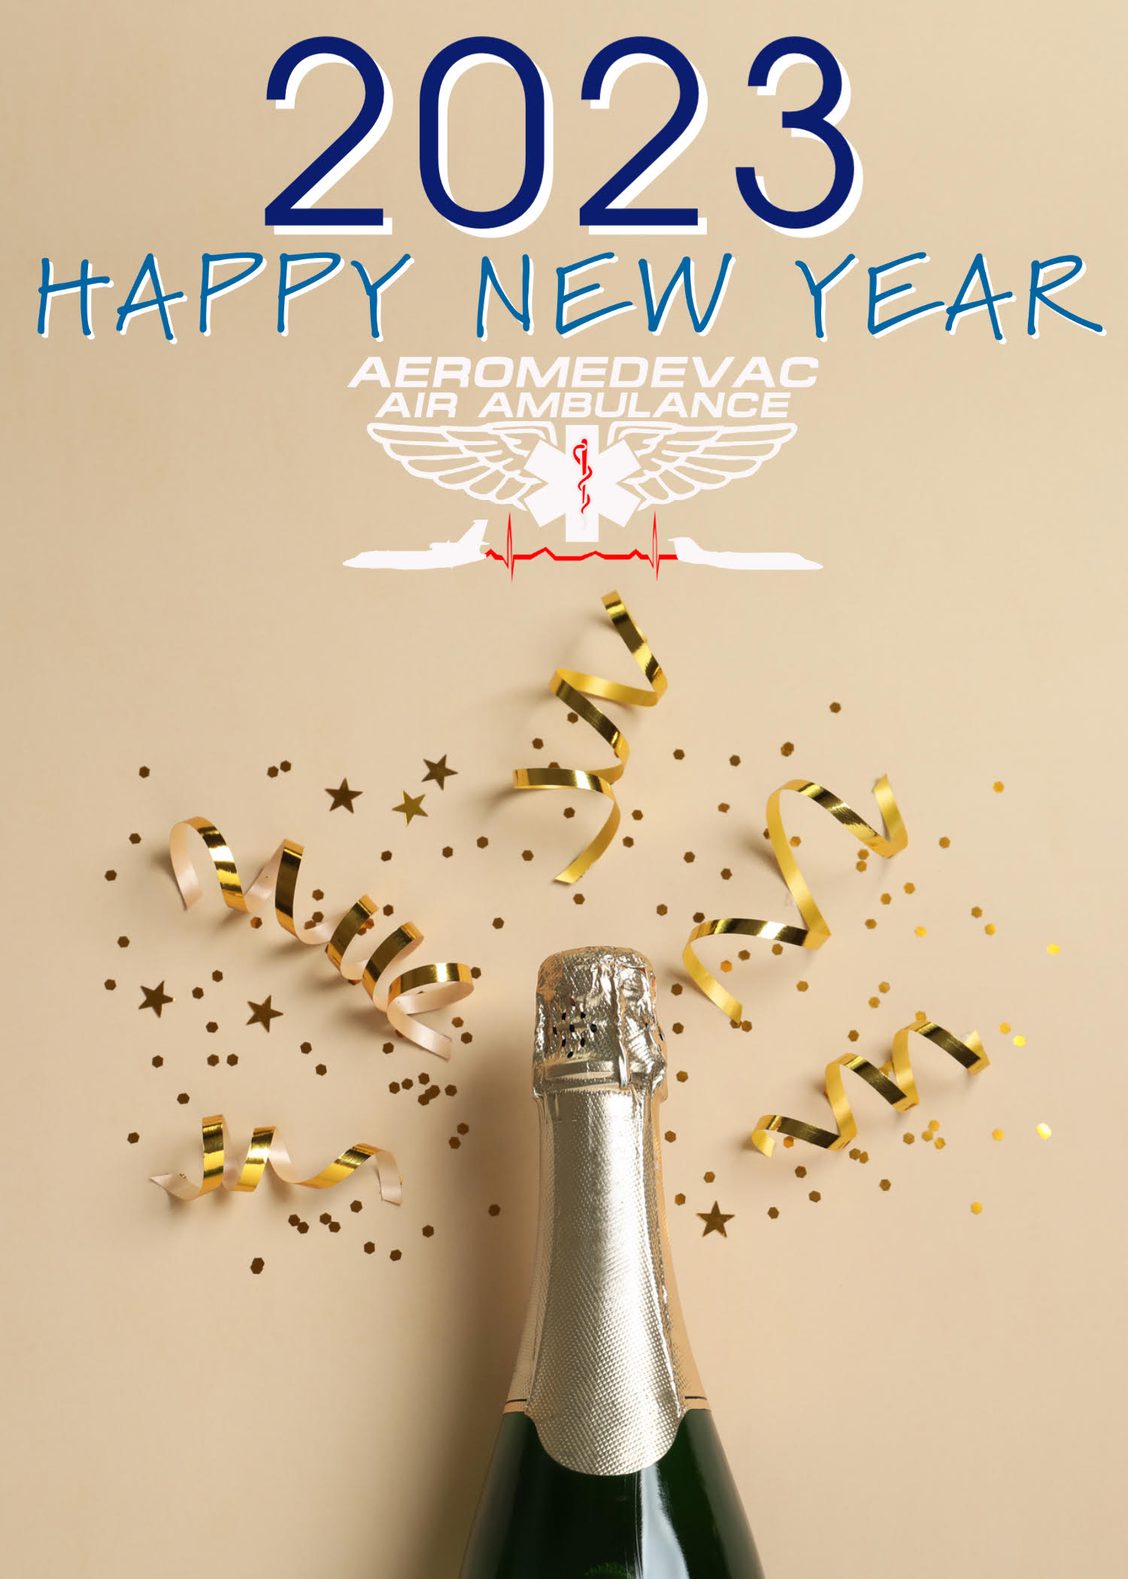 New Years champagne bottle and confetti celebrating the start of 2023 and a new digital web presence for Aeromedevac Air Ambulance